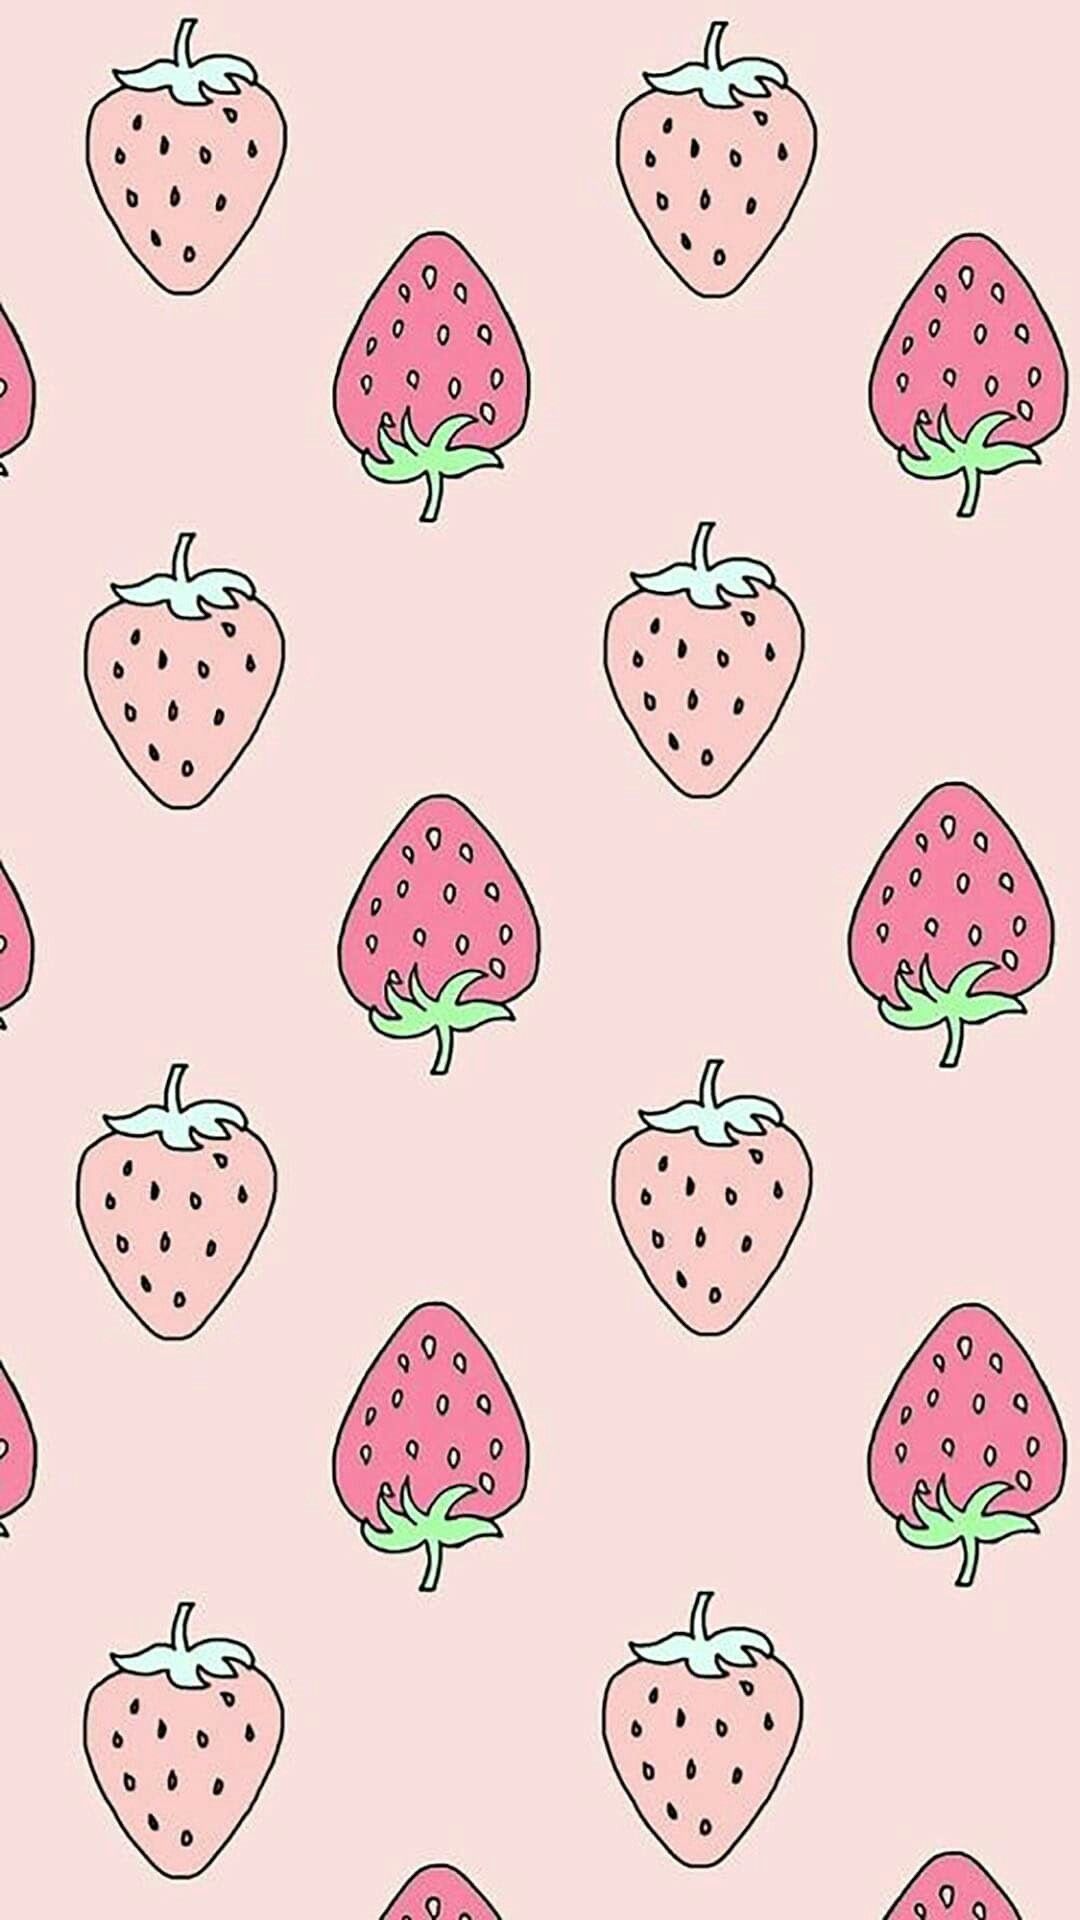 Strawberry Fruit And Flowers On A Pink Background by Stocksy Contributor  Ruth Black  Purple flower background Strawberry background Fruit  wallpaper